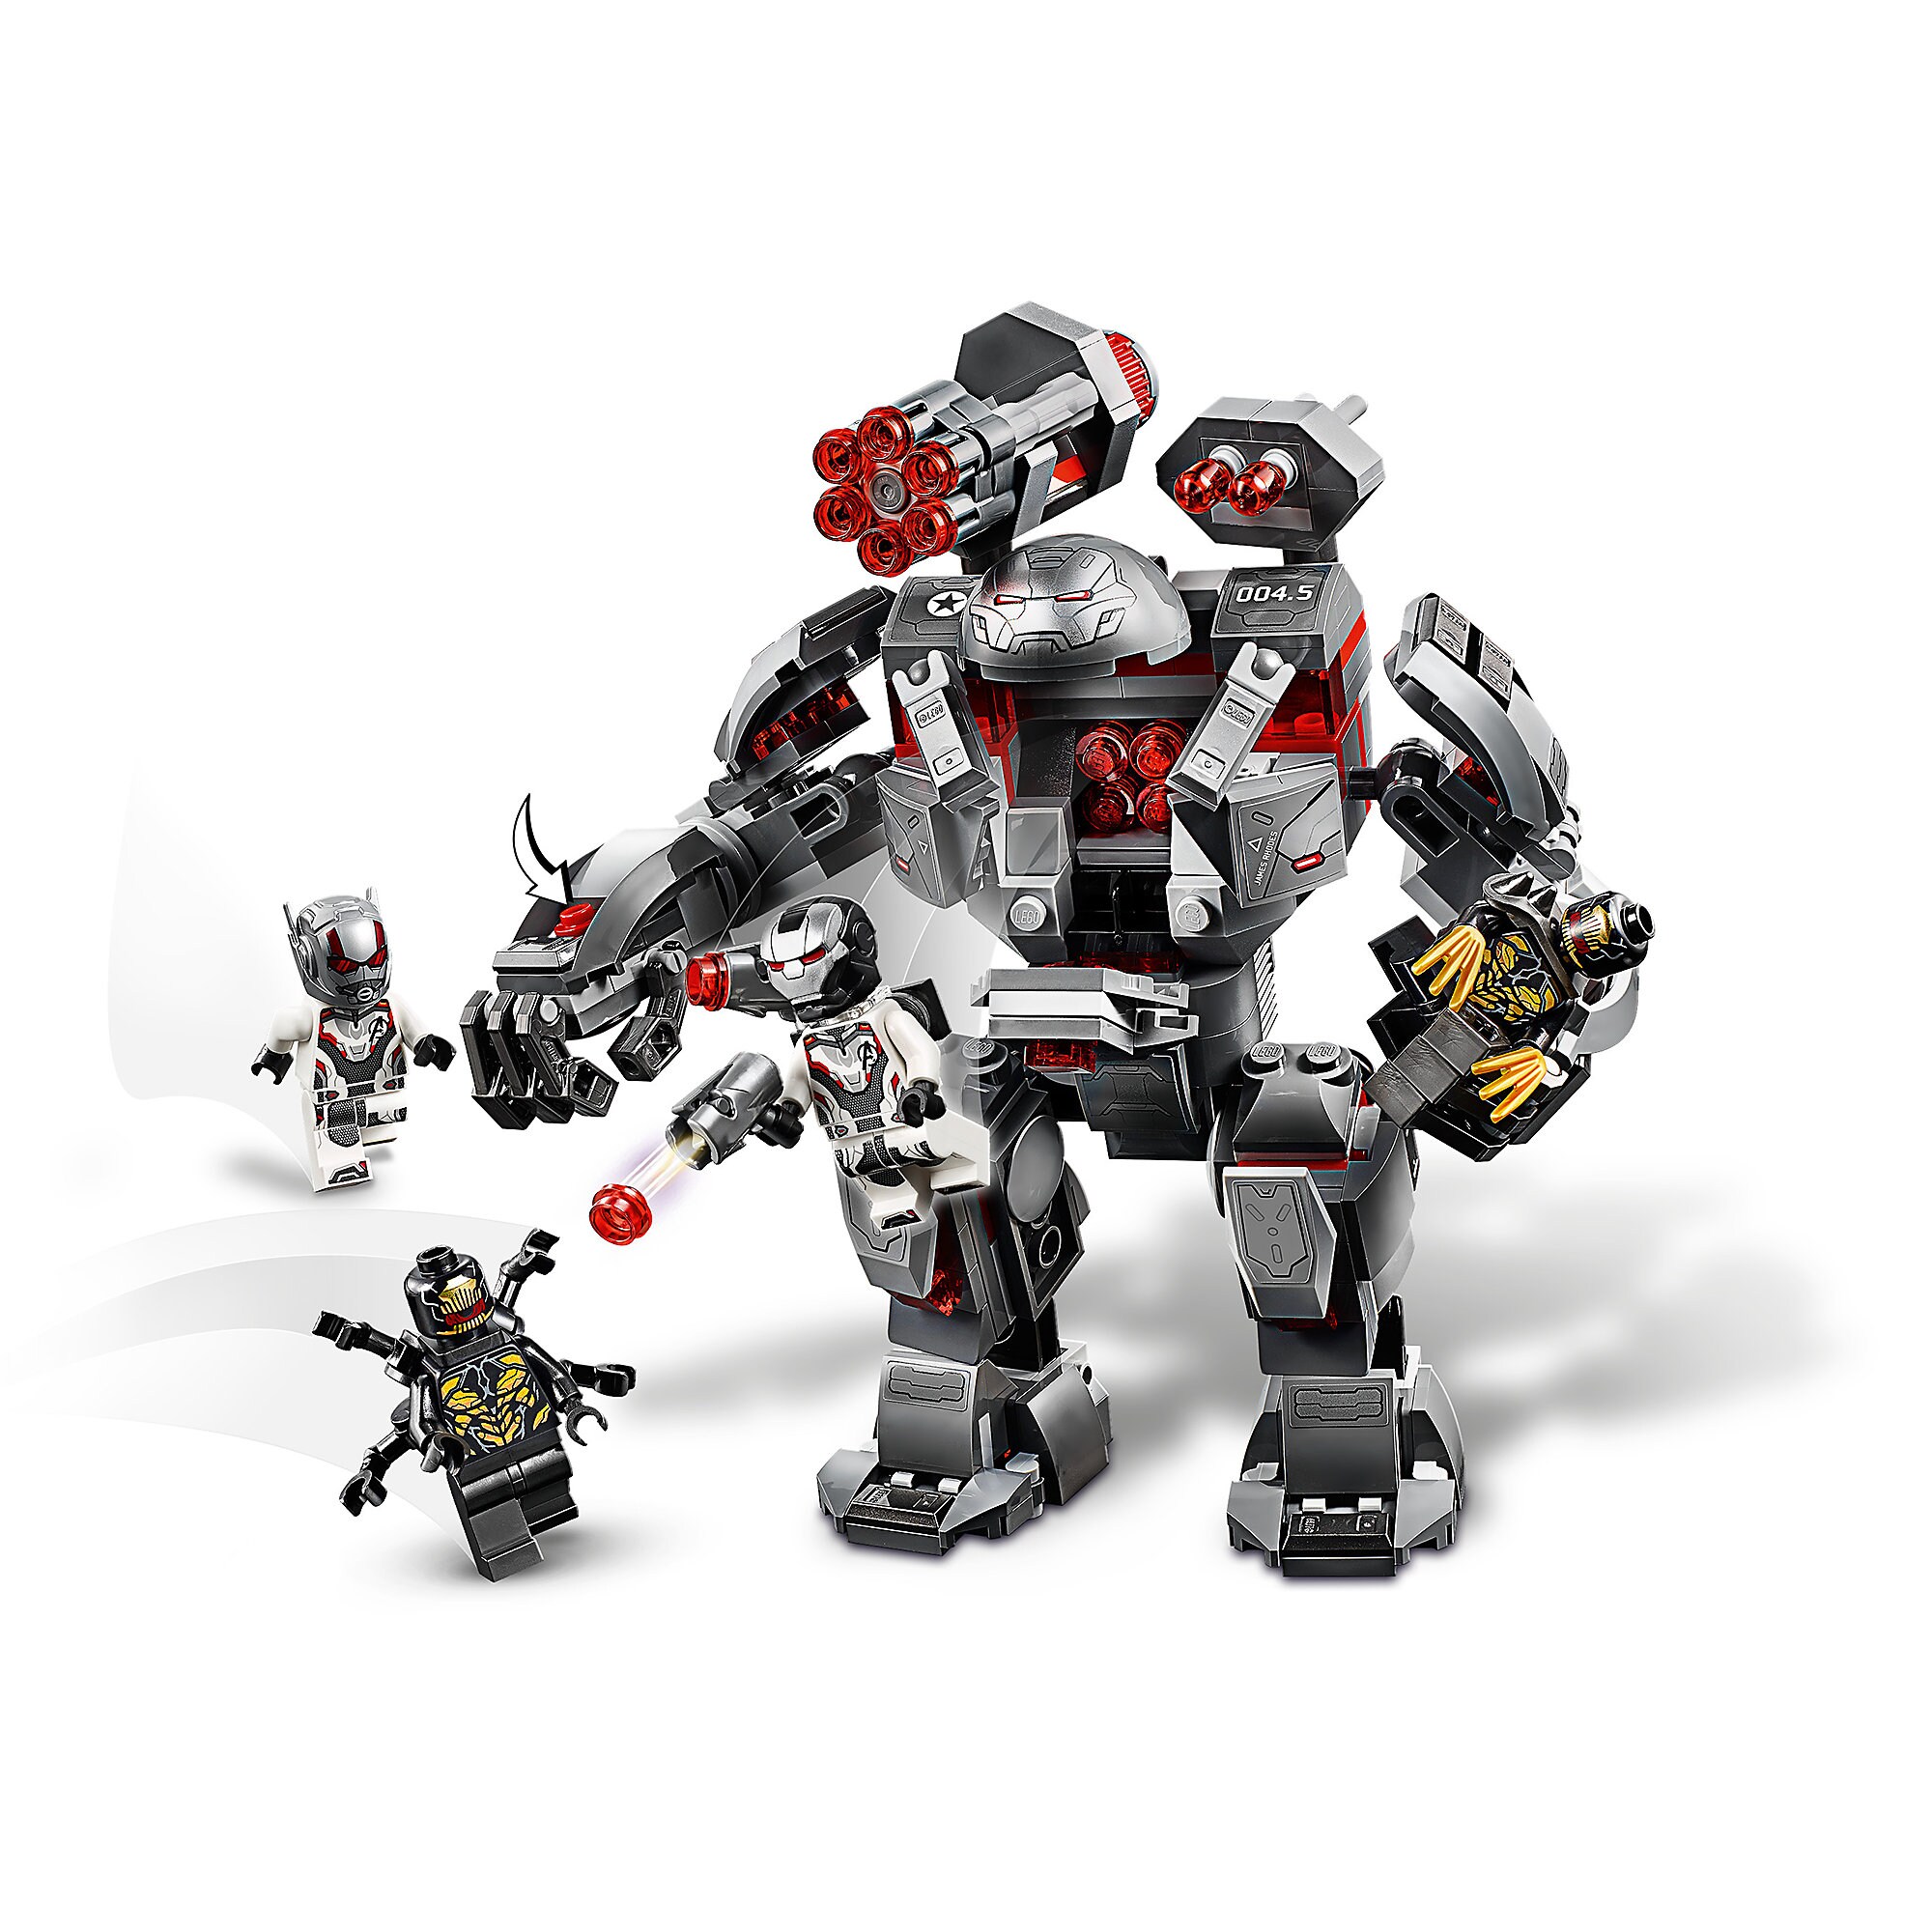 War Machine Buster Play Set by LEGO - Marvel Avengers